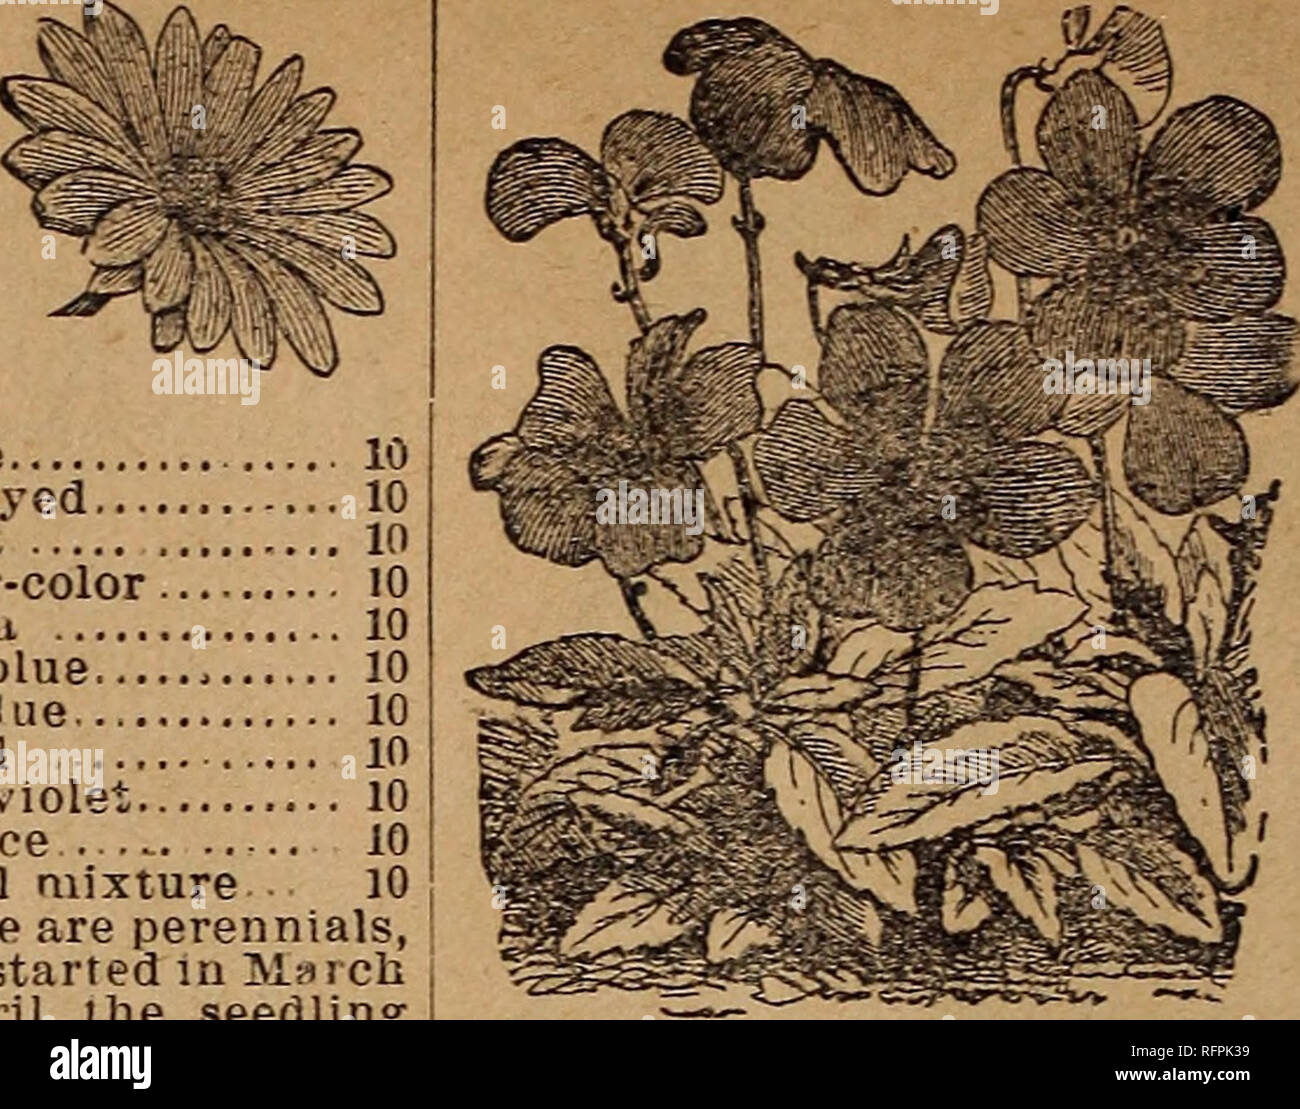 . Park's floral guide, 1896. Nursery stock Pennsylvania Catalogs; Flowers Seeds Catalogs. Vetiiditimfuffas, perennial, Cape of GoodHope 5 A very snowy, trailing com- posite, bearing masse* of golden .yellow flowers. Sow early, and set plant* 10 inches apart This plant is a half hardy perennial and likes a warm, sunny border. In sueh a situation it becomes a sheet of golden bloom, and is gor- geous. My patrons in the South should noi fail to try til is dower Verbena hybrida (Hybrids), white Dark-eyed Sca.net Coppgr-color Luteu Dark blue Pure blue Striped Daik violet Defiance ... .. Special mixt Stock Photo